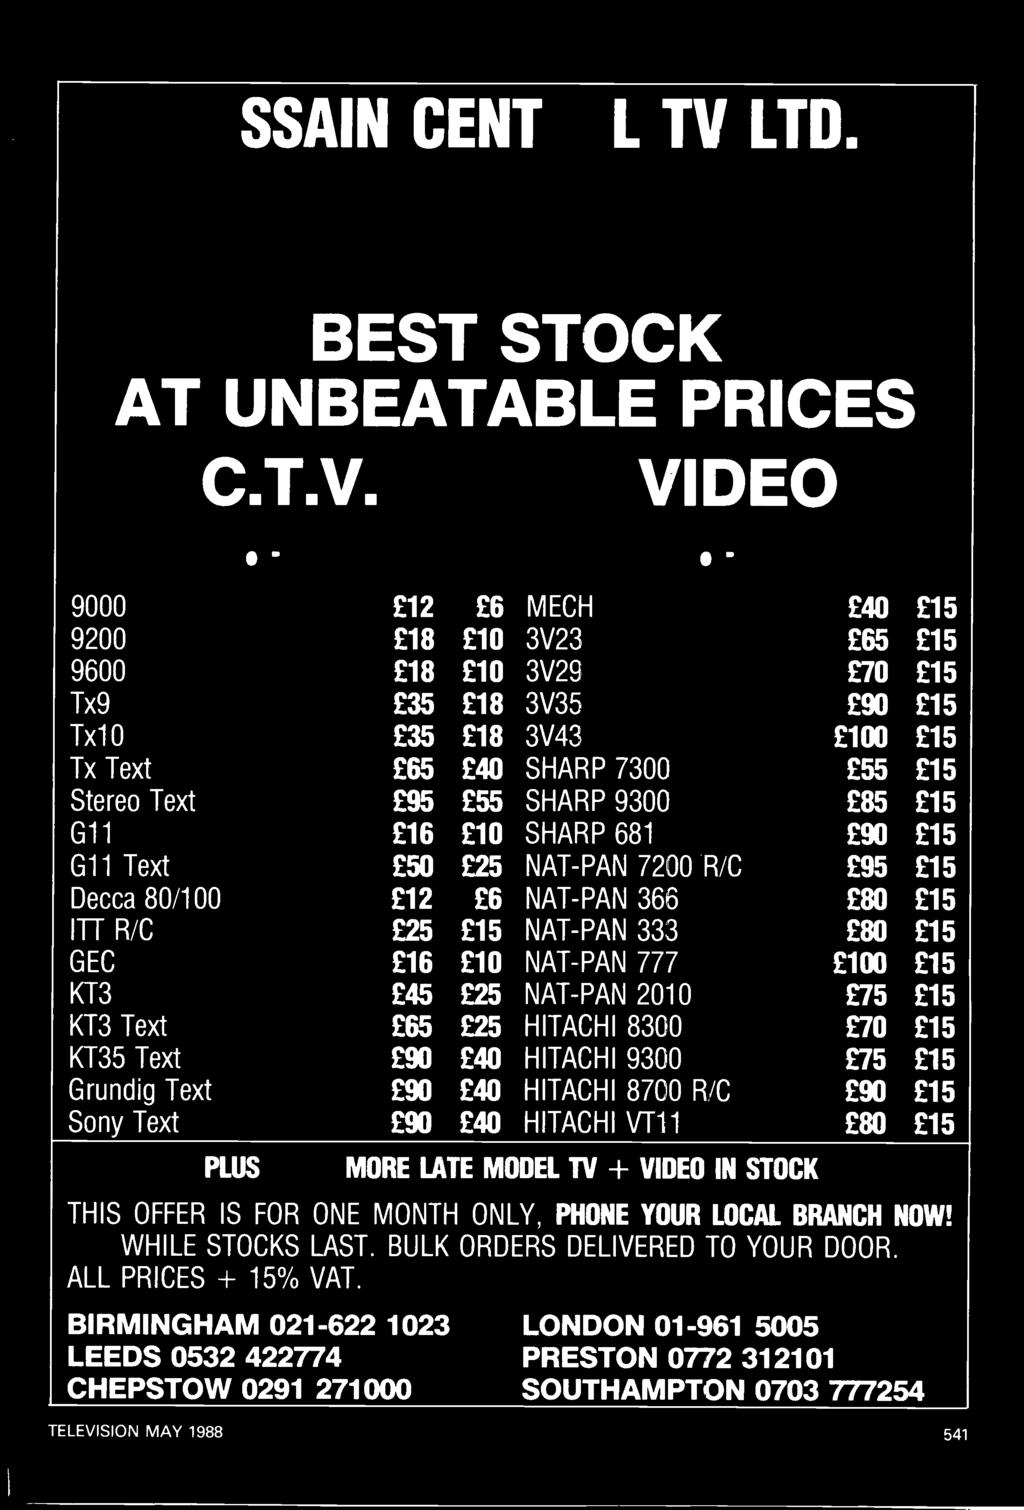 TV + VIDEO IN STOCK THIS OFFER IS FOR ONE MONTH ONLY, PHONE YOUR LOCAL BRANCH NOW!